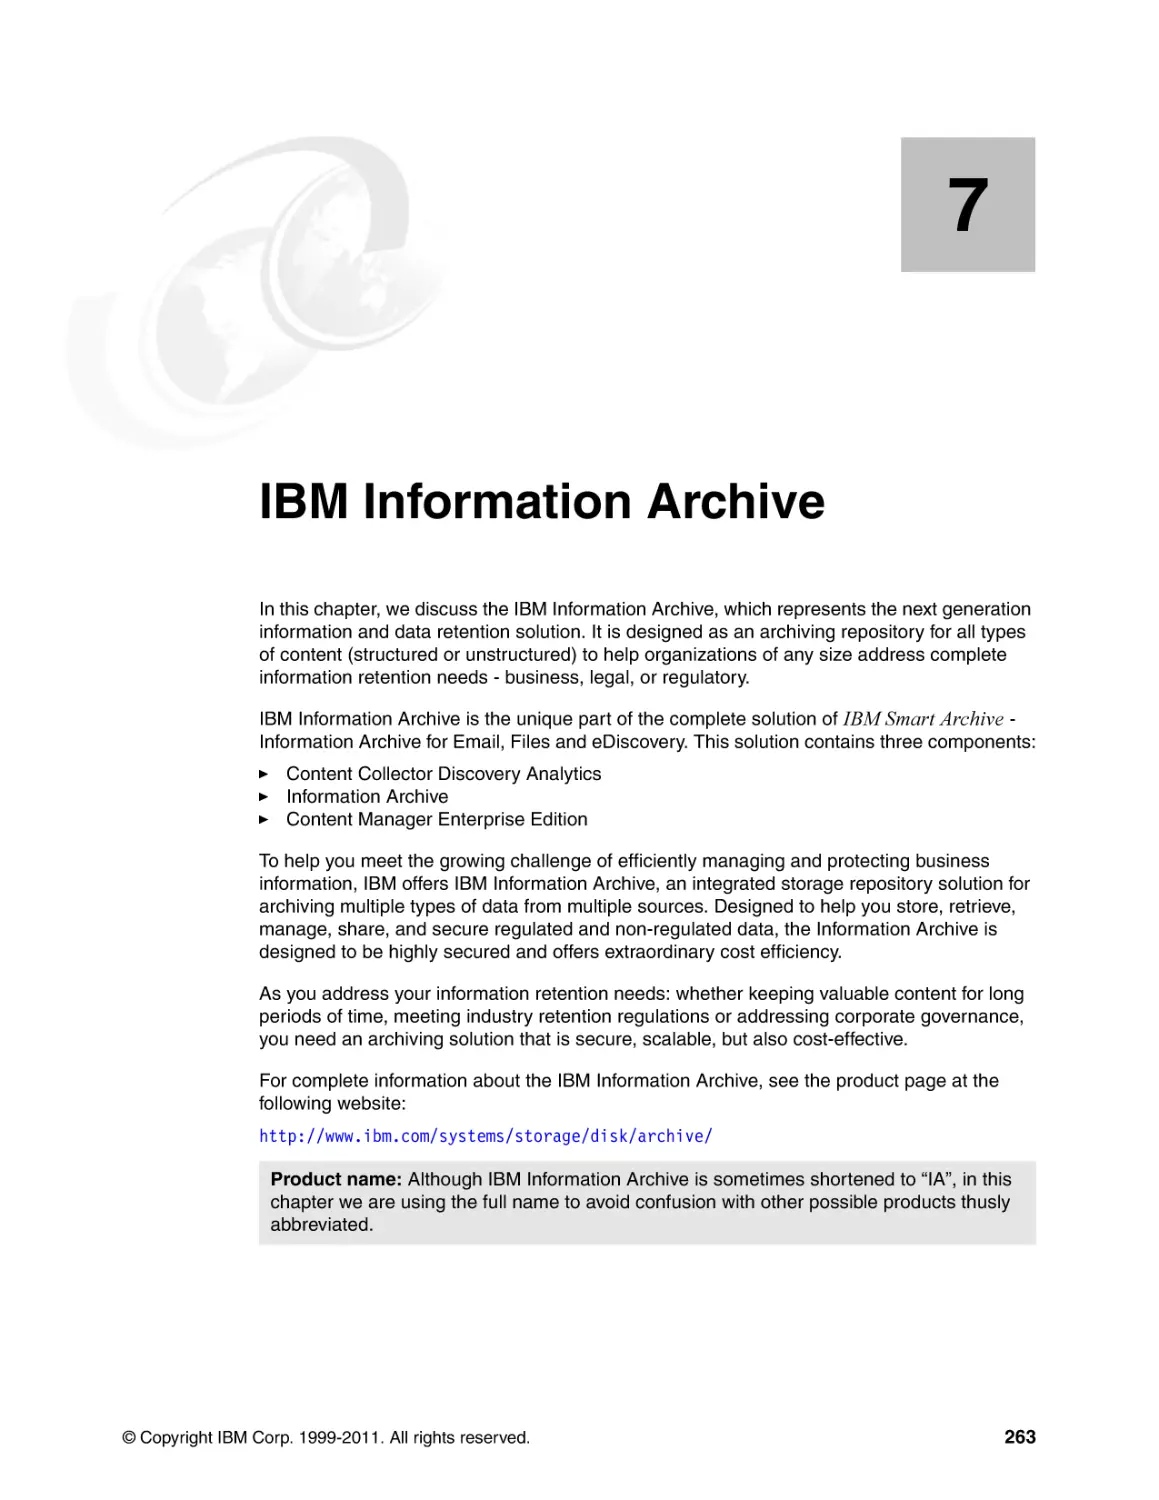 Chapter 7. IBM Information Archive